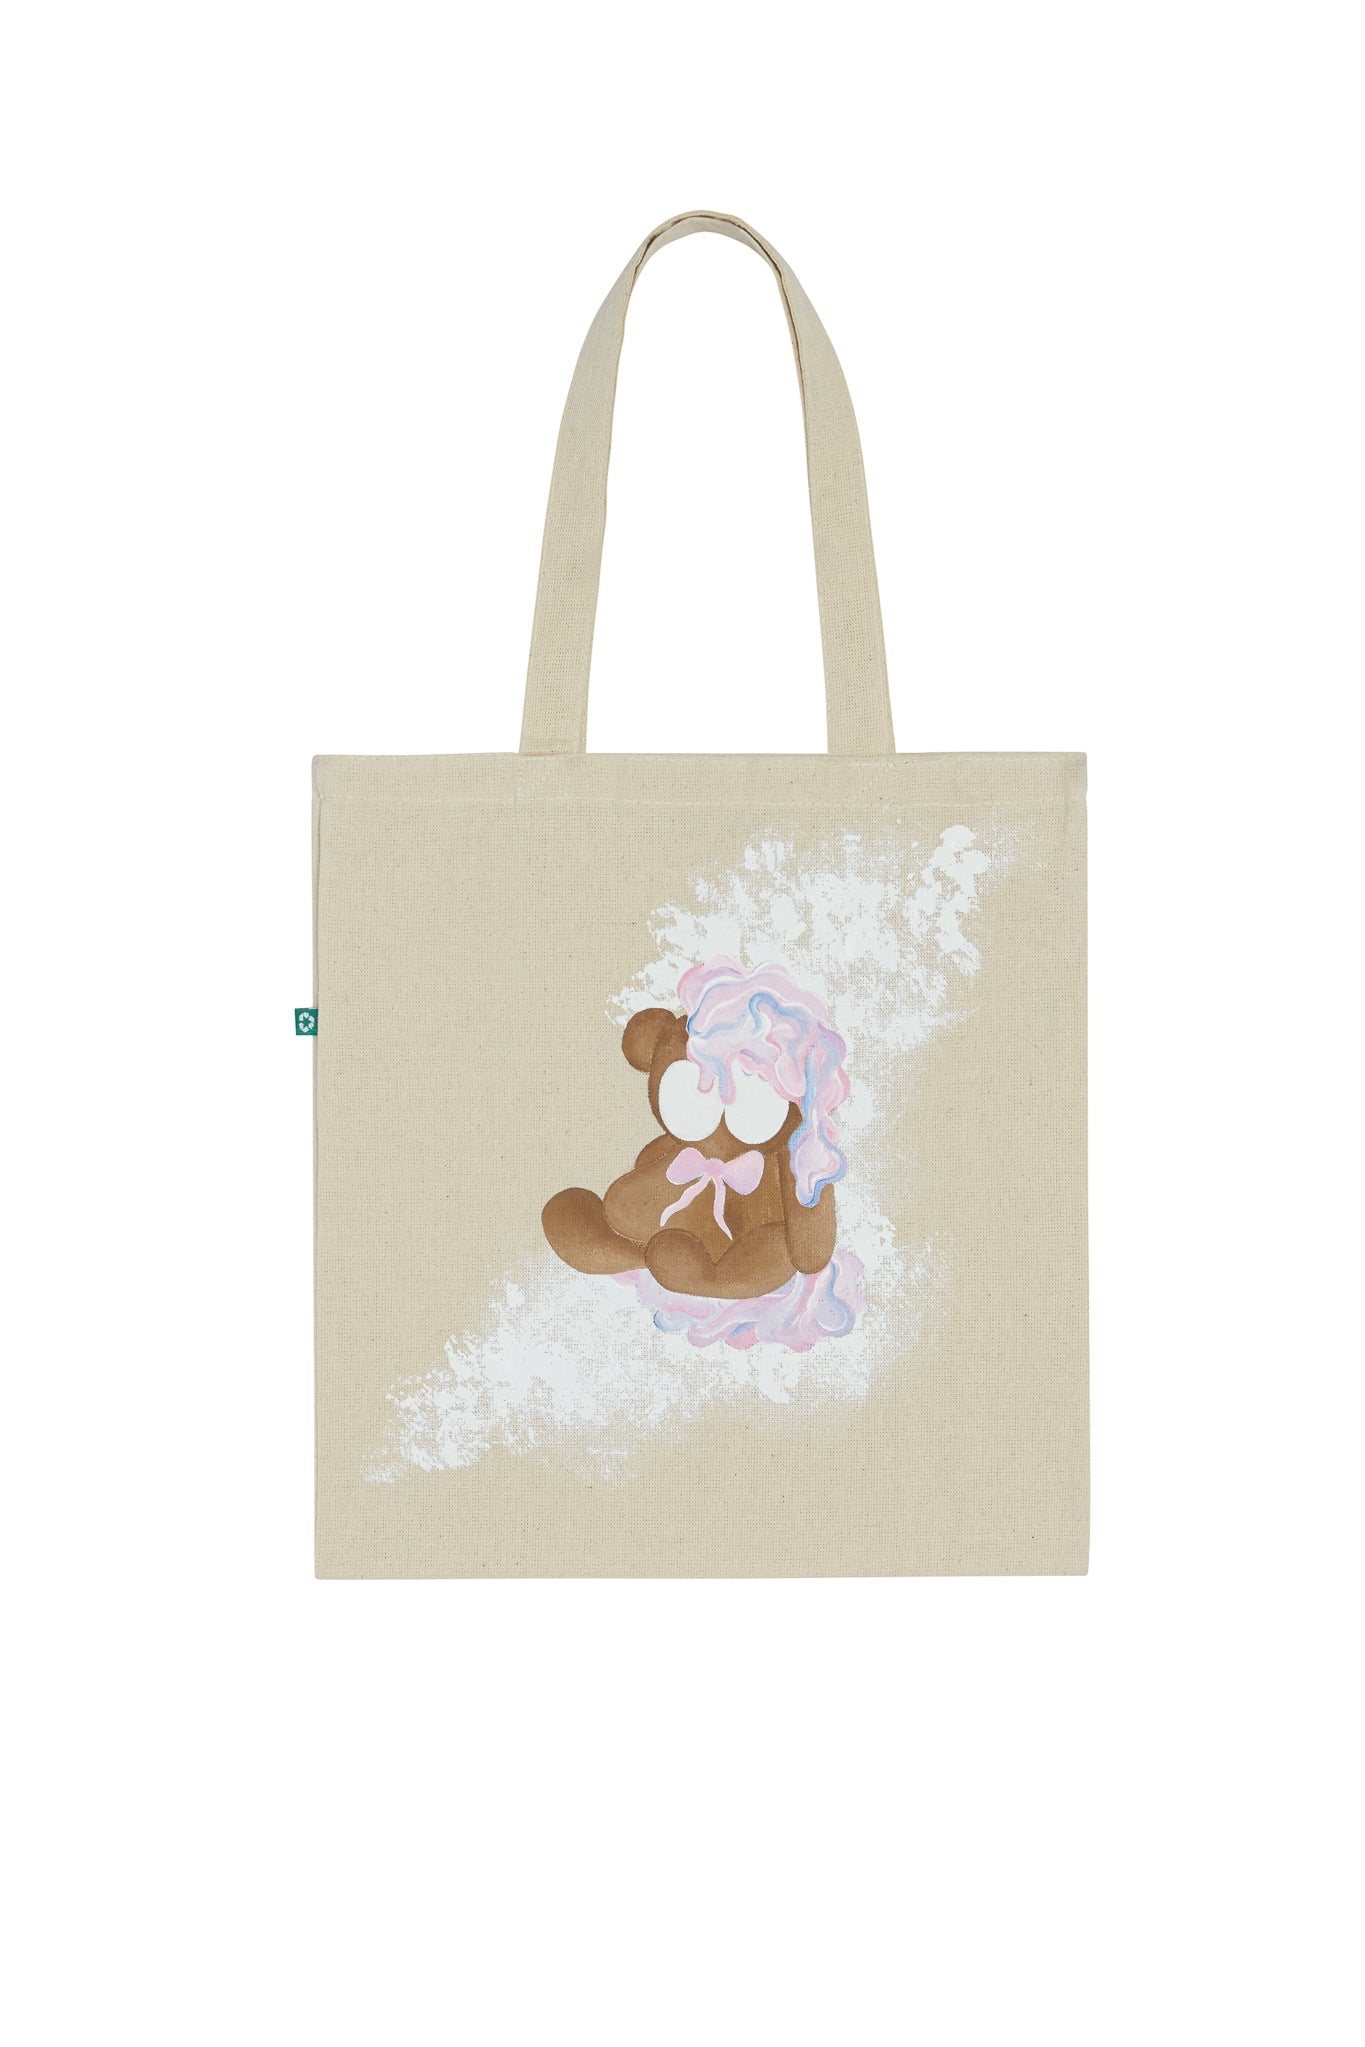 The Paintspill Tote Bag